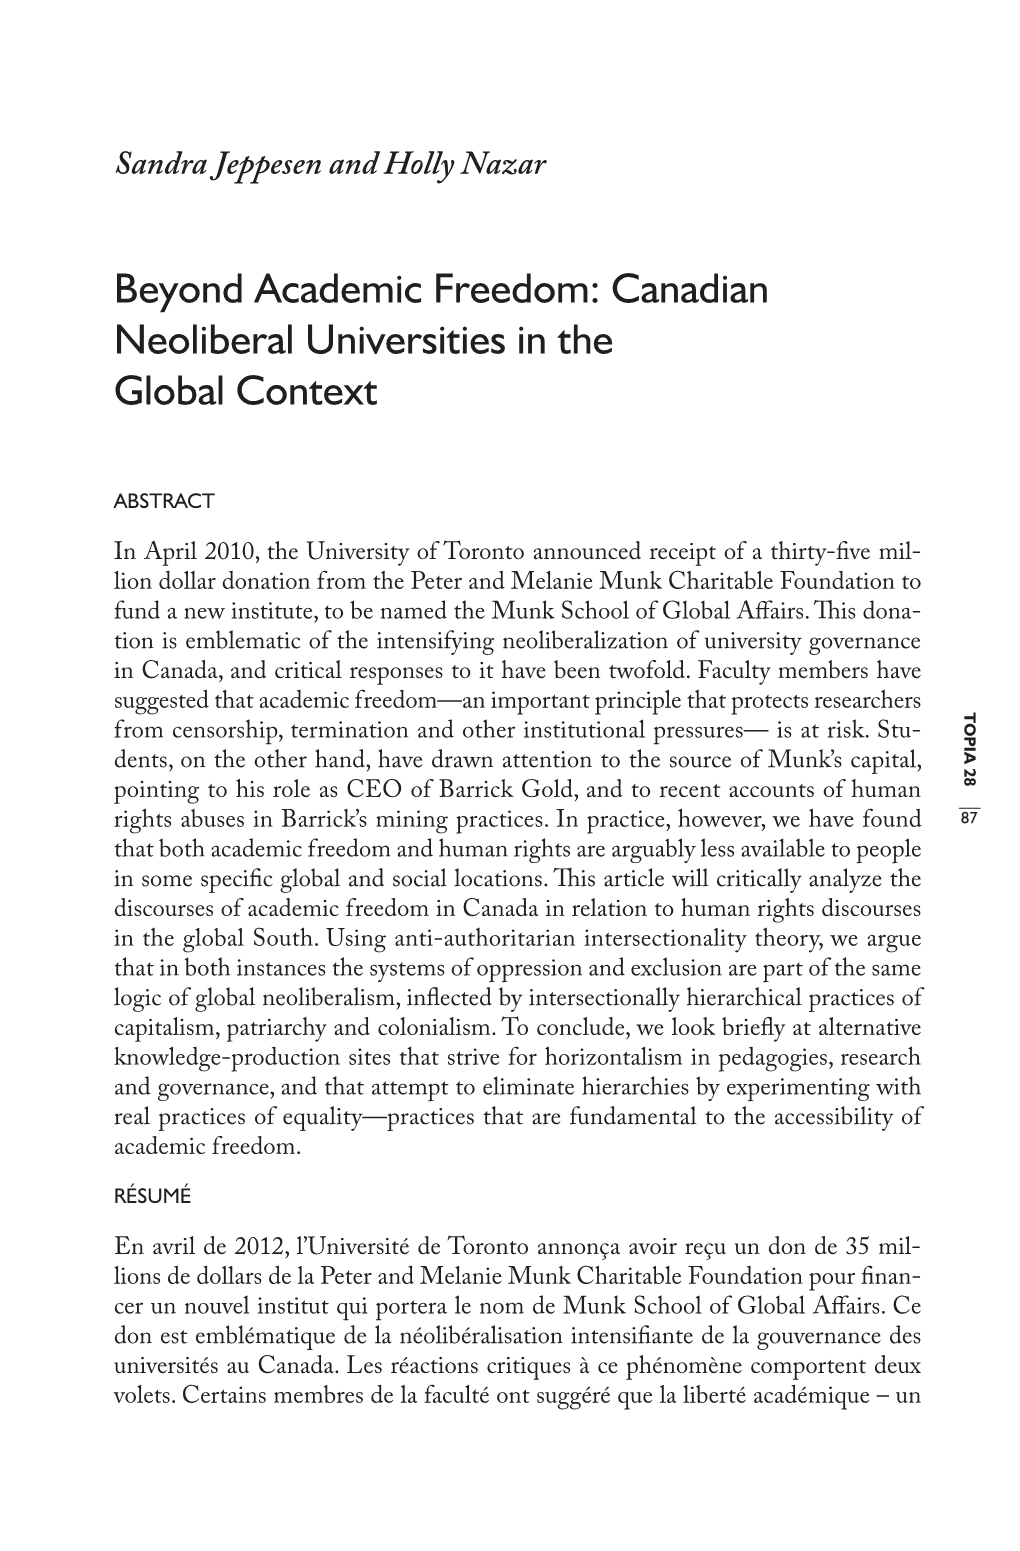 Canadian Neoliberal Universities in the Global Context